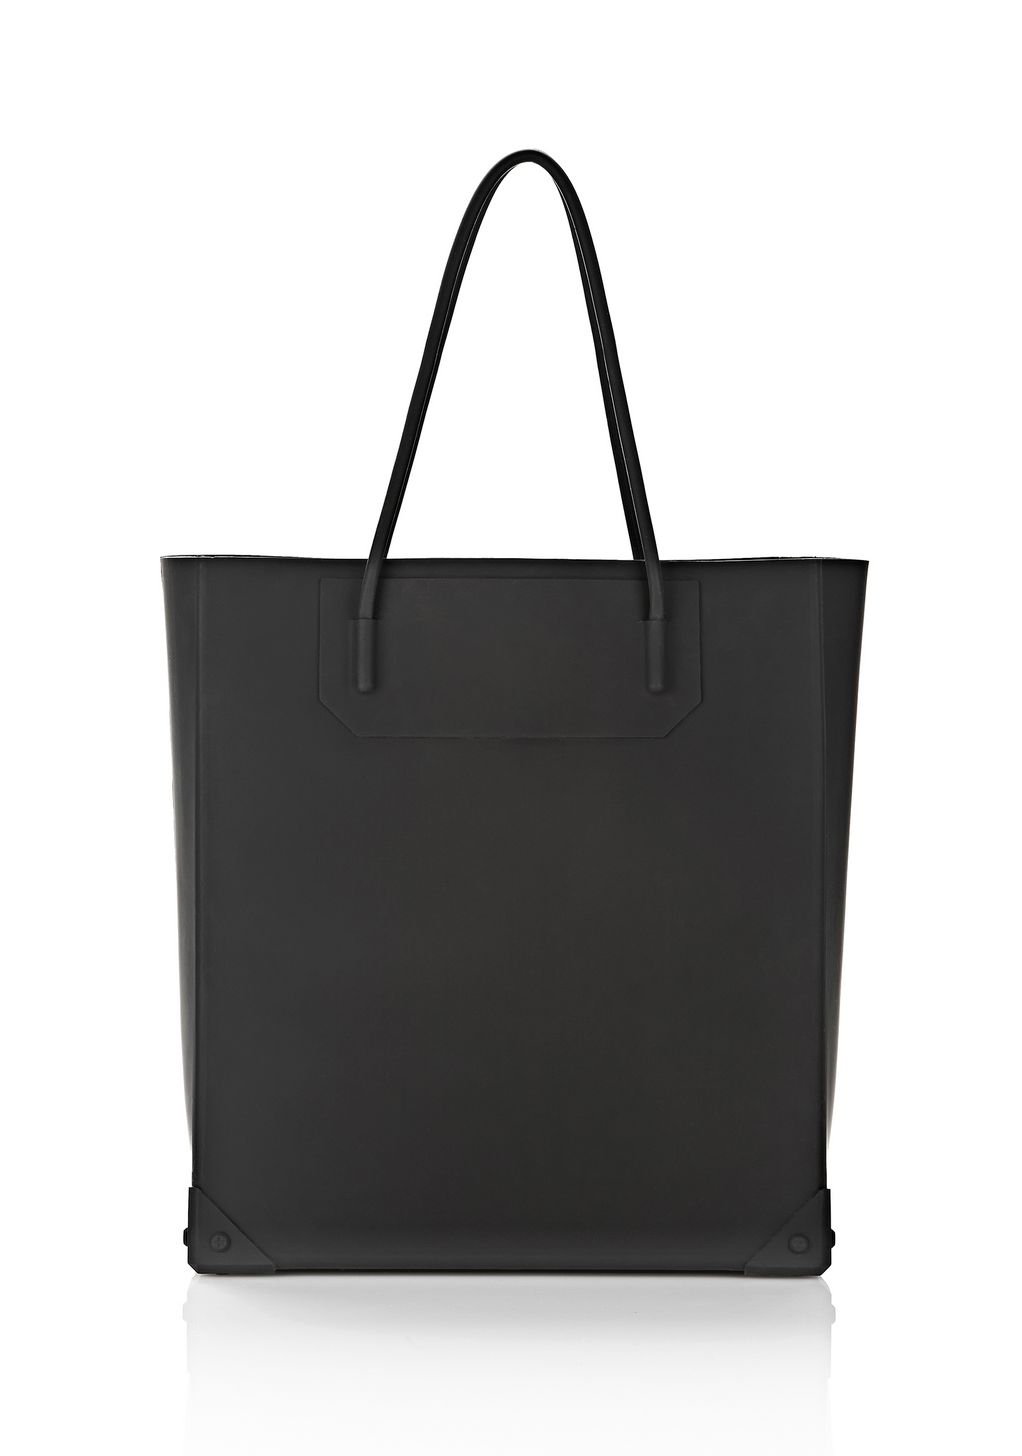 Alexander Wang ‎SILICON TOTE IN BLACK ‎ ‎TOTE/DEL‎ | Official Site